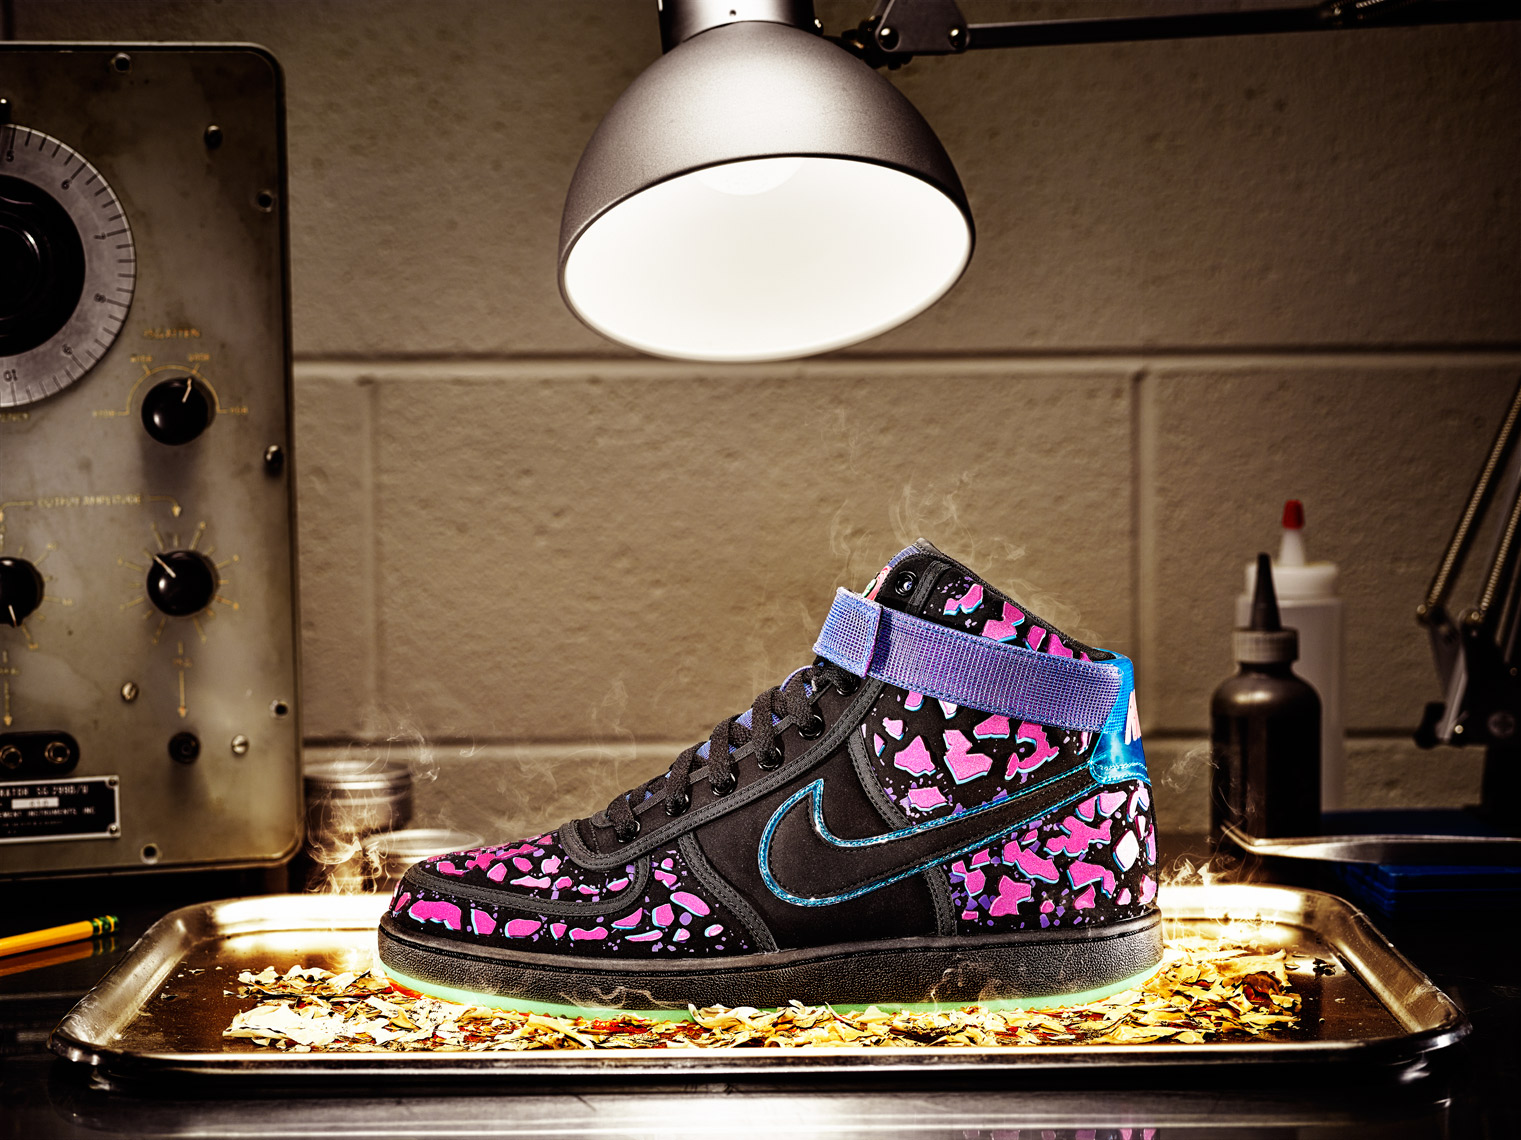 Nike Footwear Image Retouching and Effects